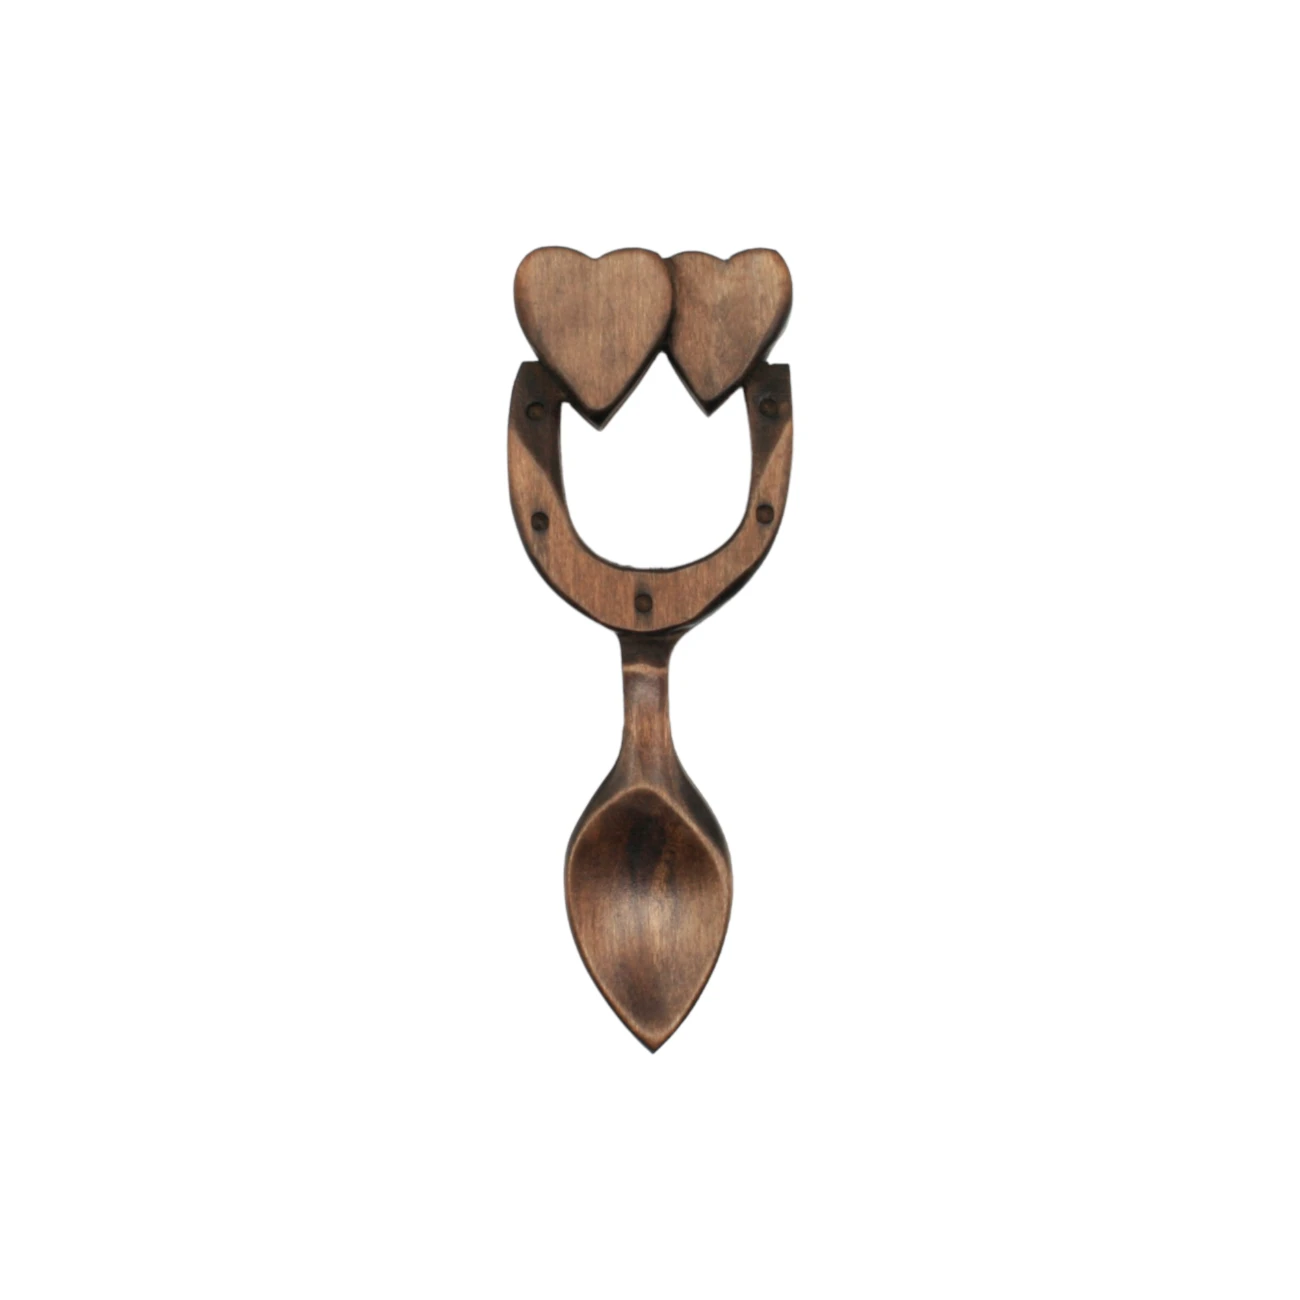 An image of a lovespoon titled Small Hearts & Horseshoe